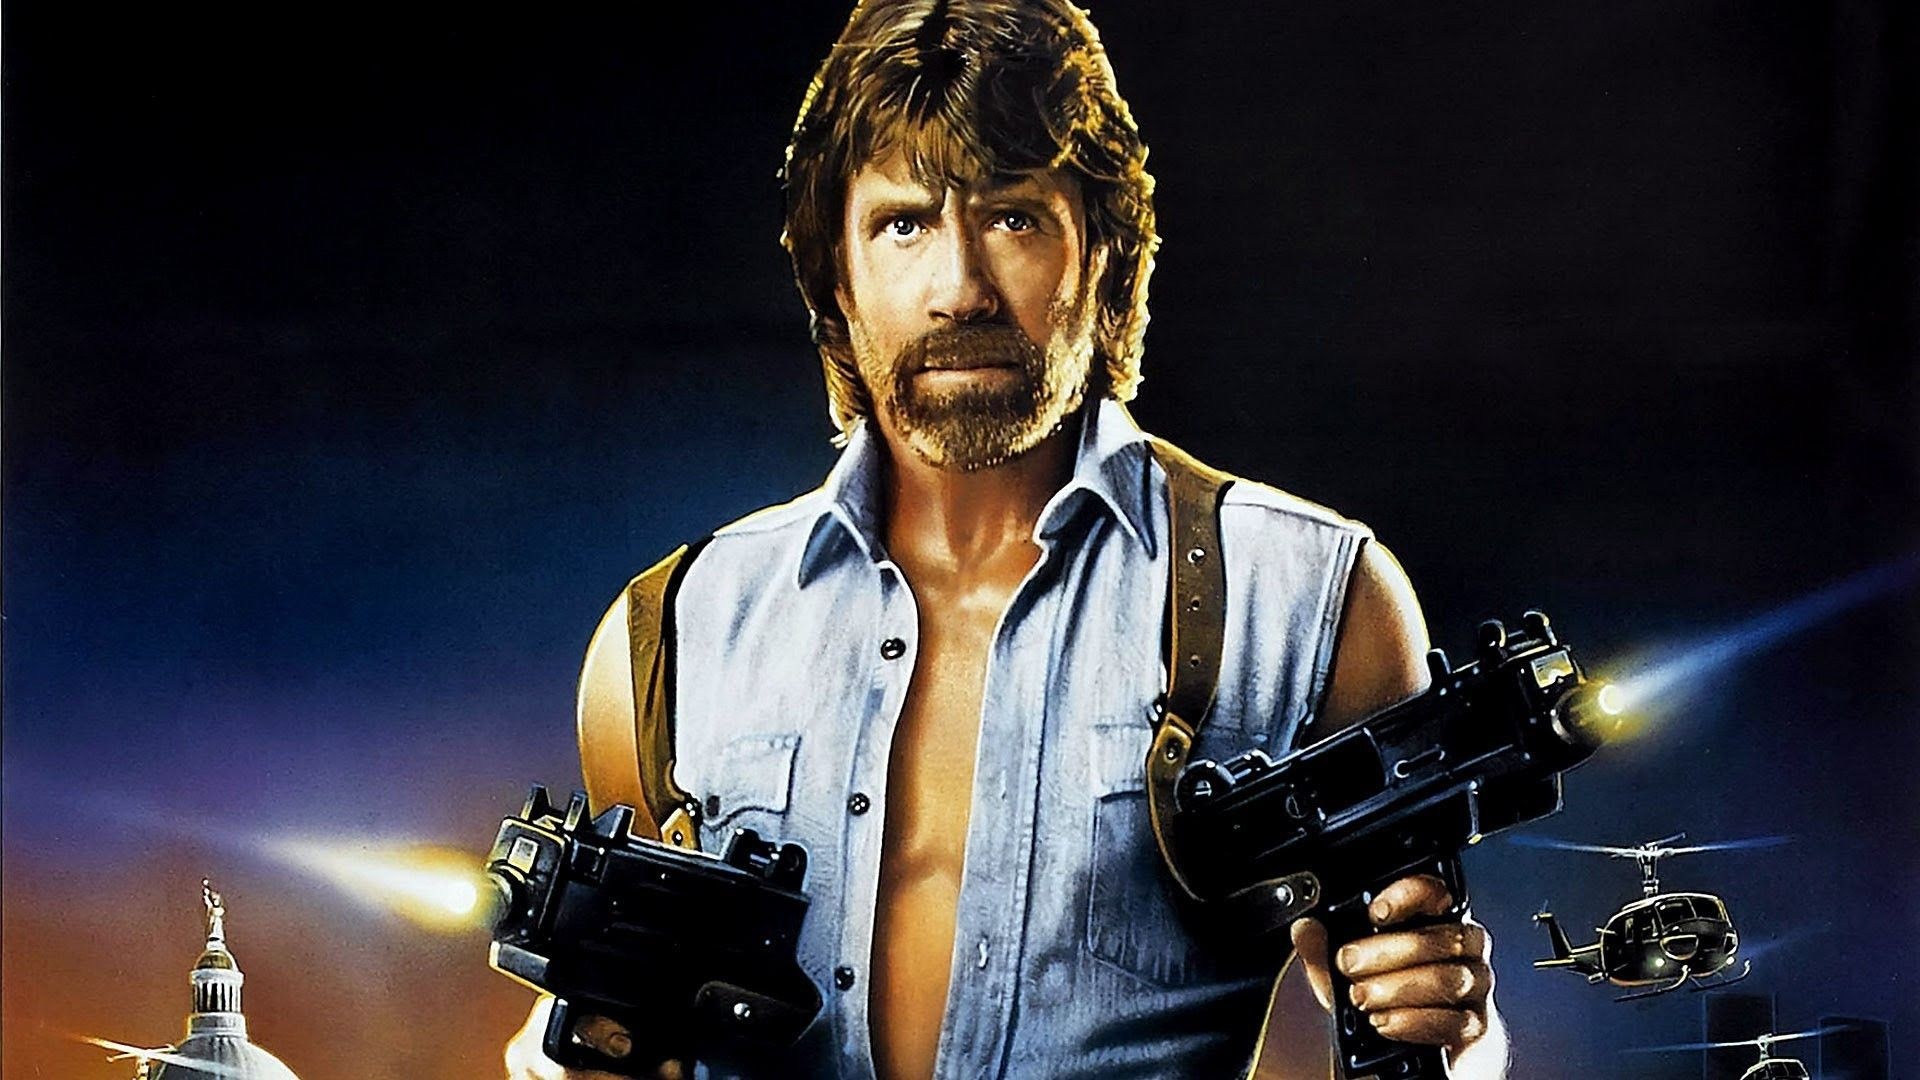 Chuck Norris, Action movie legend, Martial arts master, Exciting wallpapers, 1920x1080 Full HD Desktop